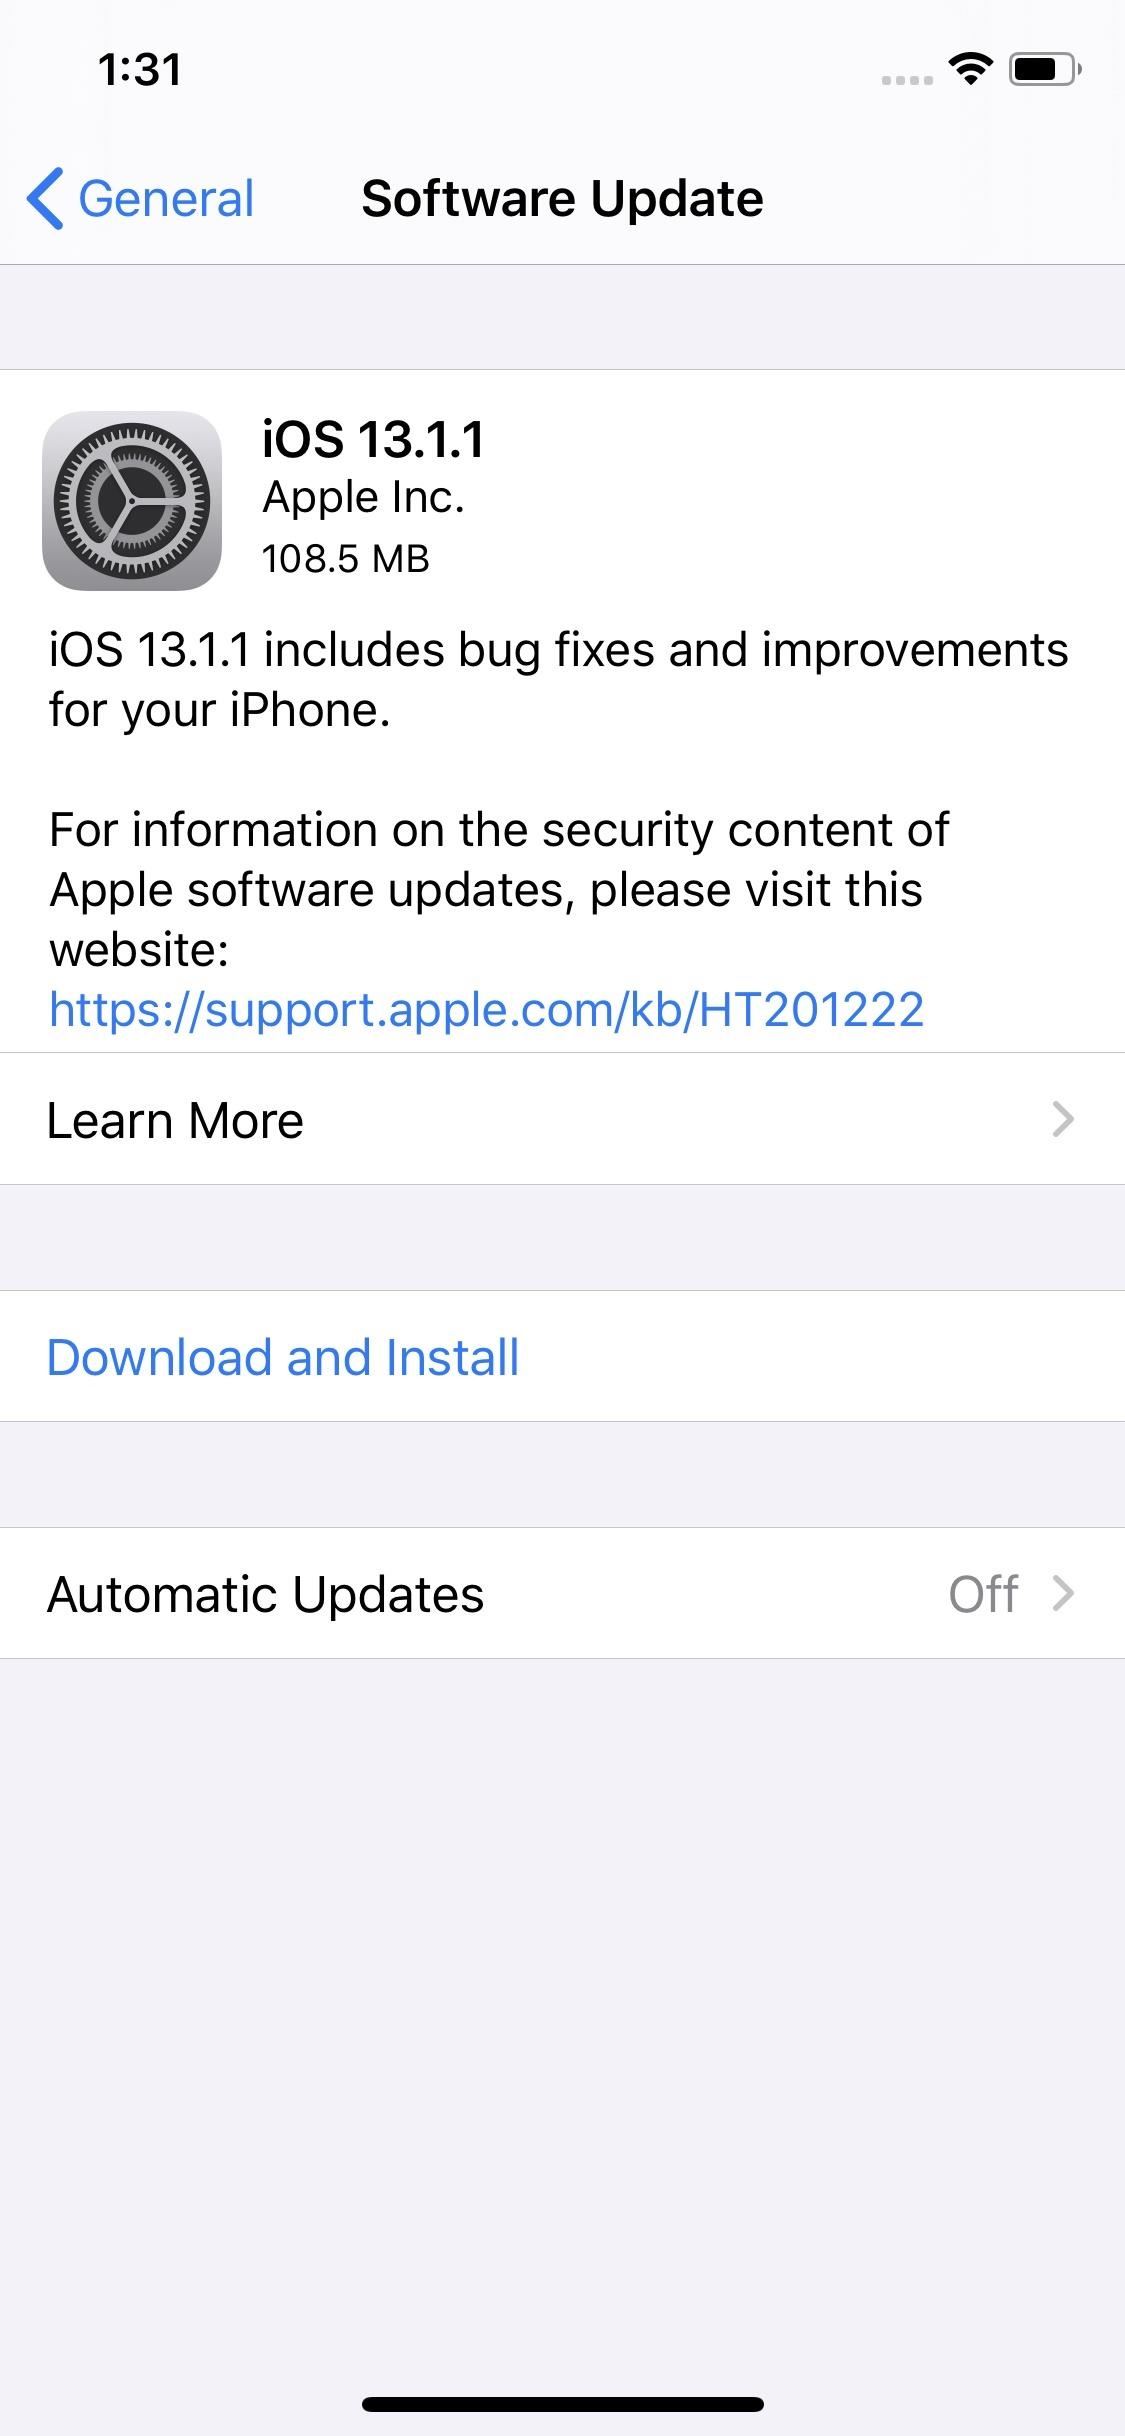 Apple's iOS 13.1.1 for iPhone Now Available, Includes Patches for Keyboard Security Flaw, Battery Drain Bug & More